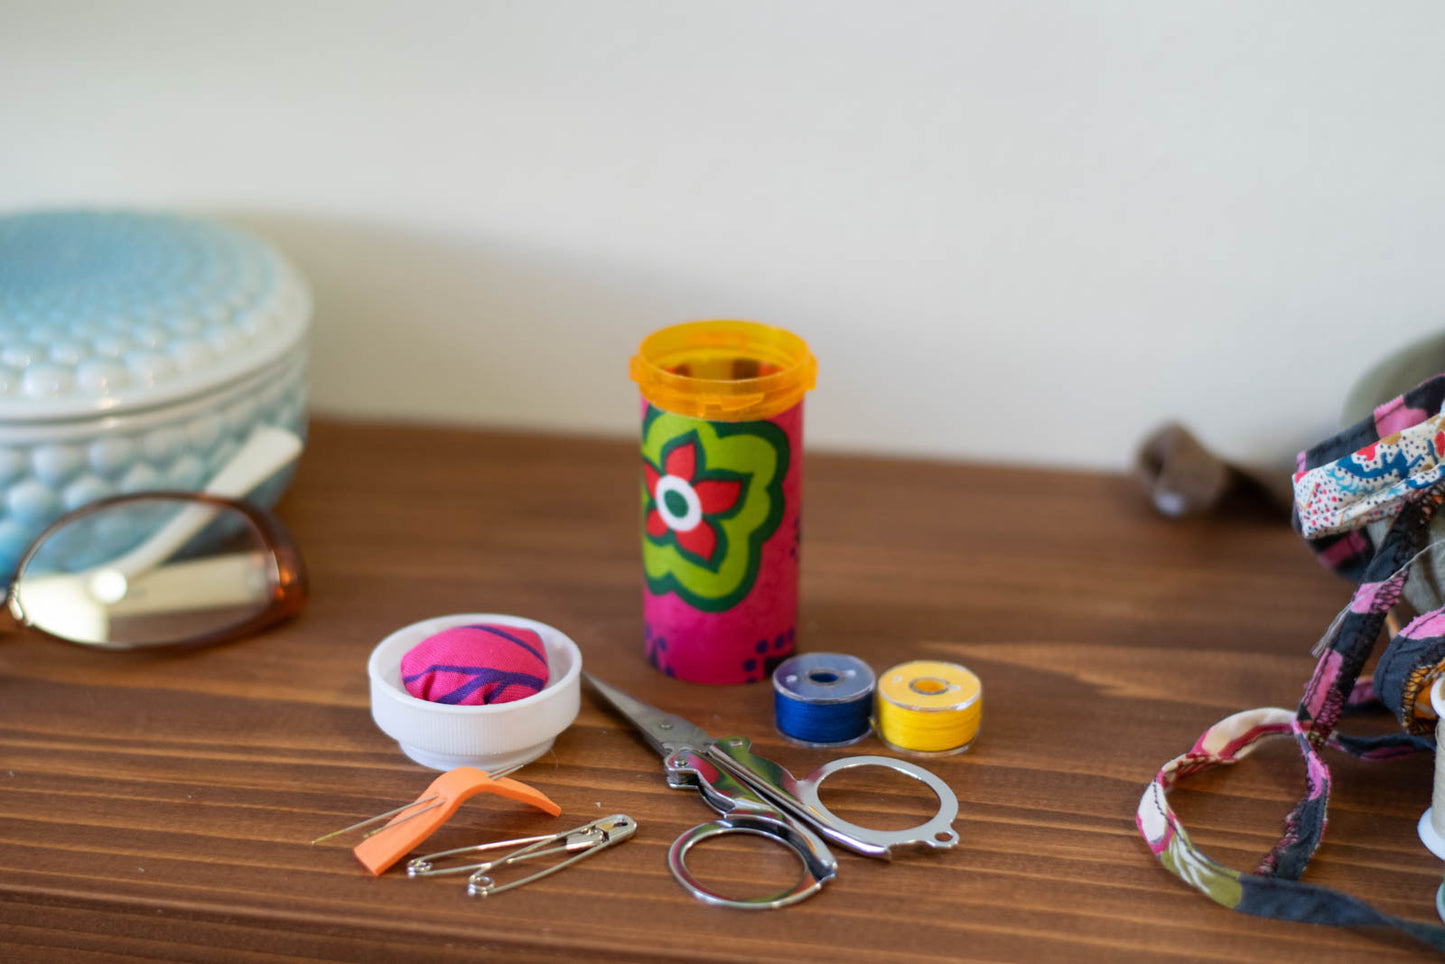 Upcycled Prescription Bottle Sewing Kit — Large Flower Print, 3" high, lid open with contents